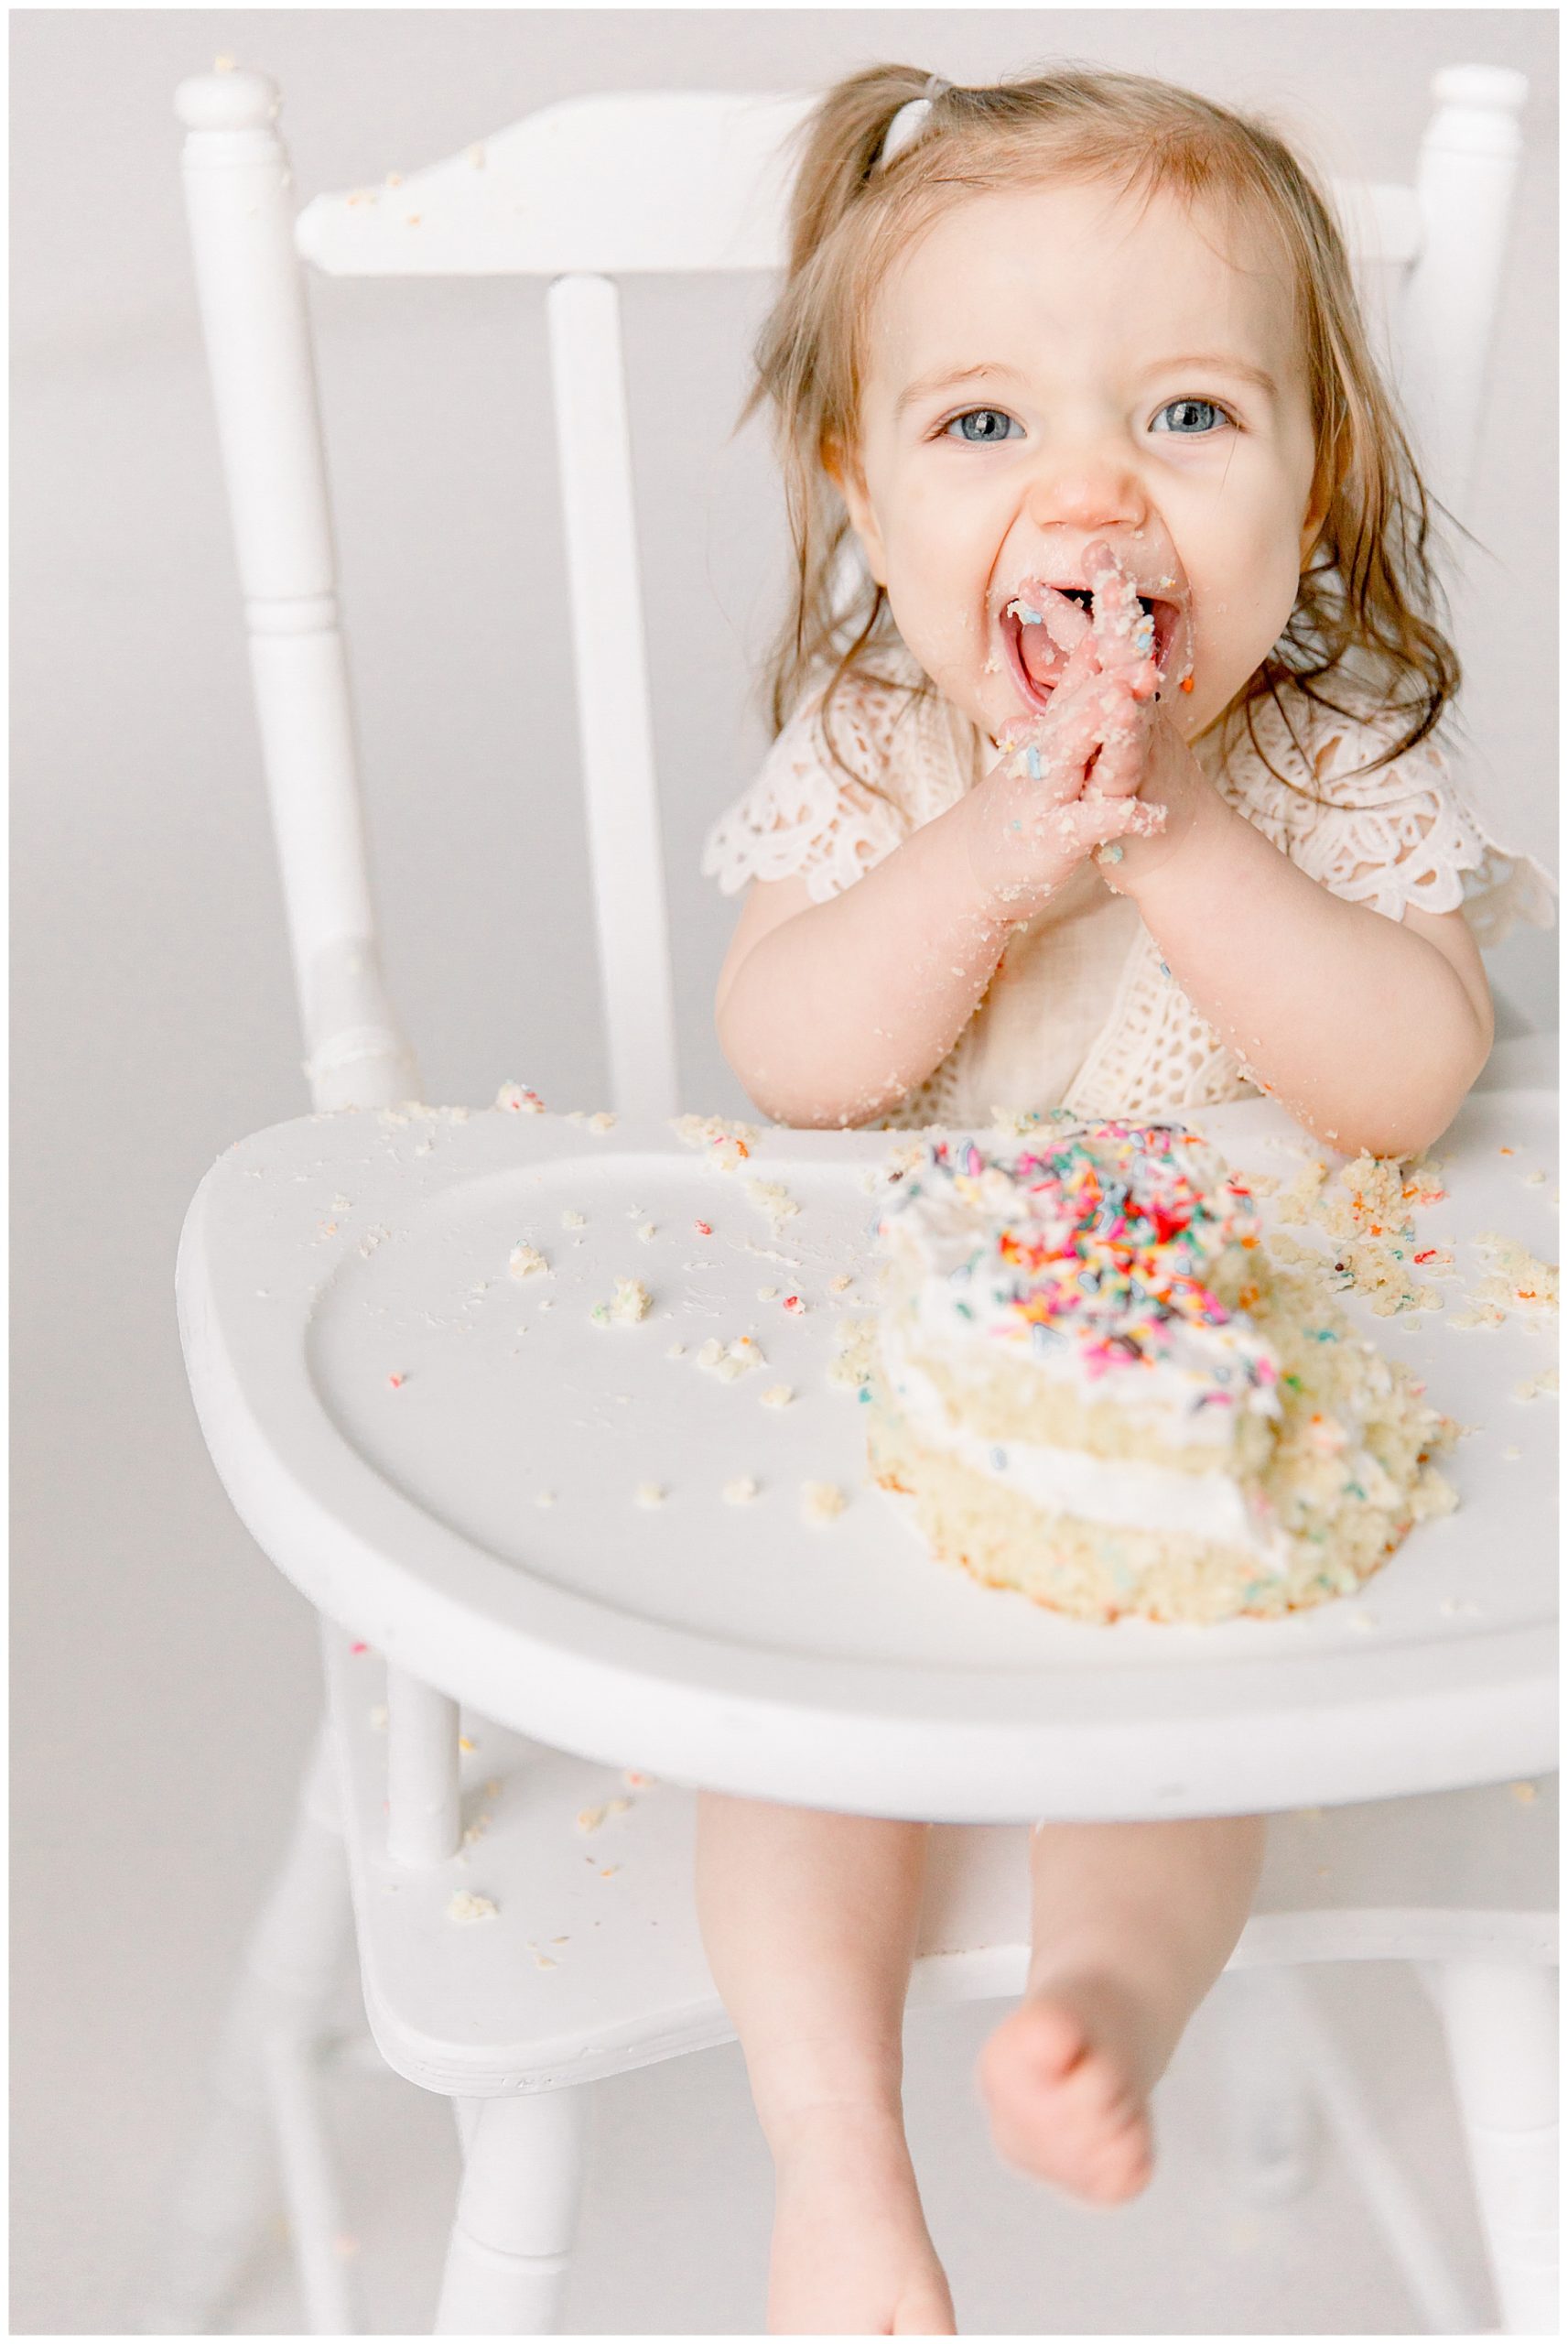 Baby girl smiling during her studio cake smash session by baby photographer in Charlotte NC